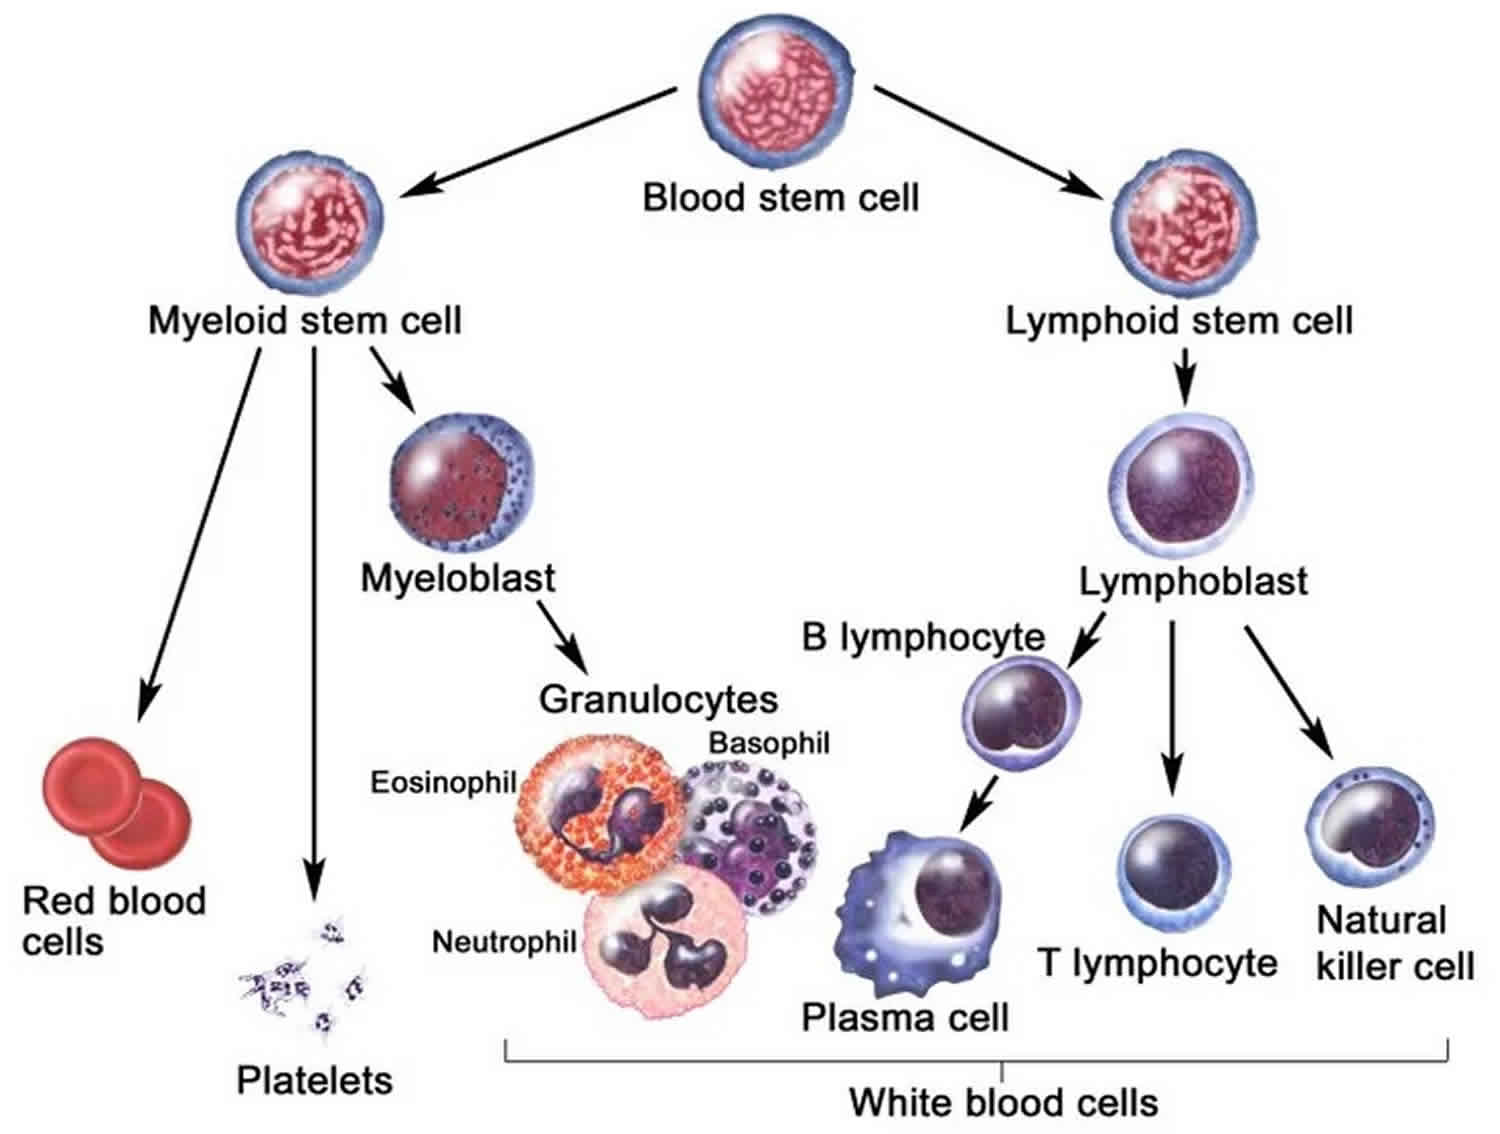 what is lymphoproliferative disorders